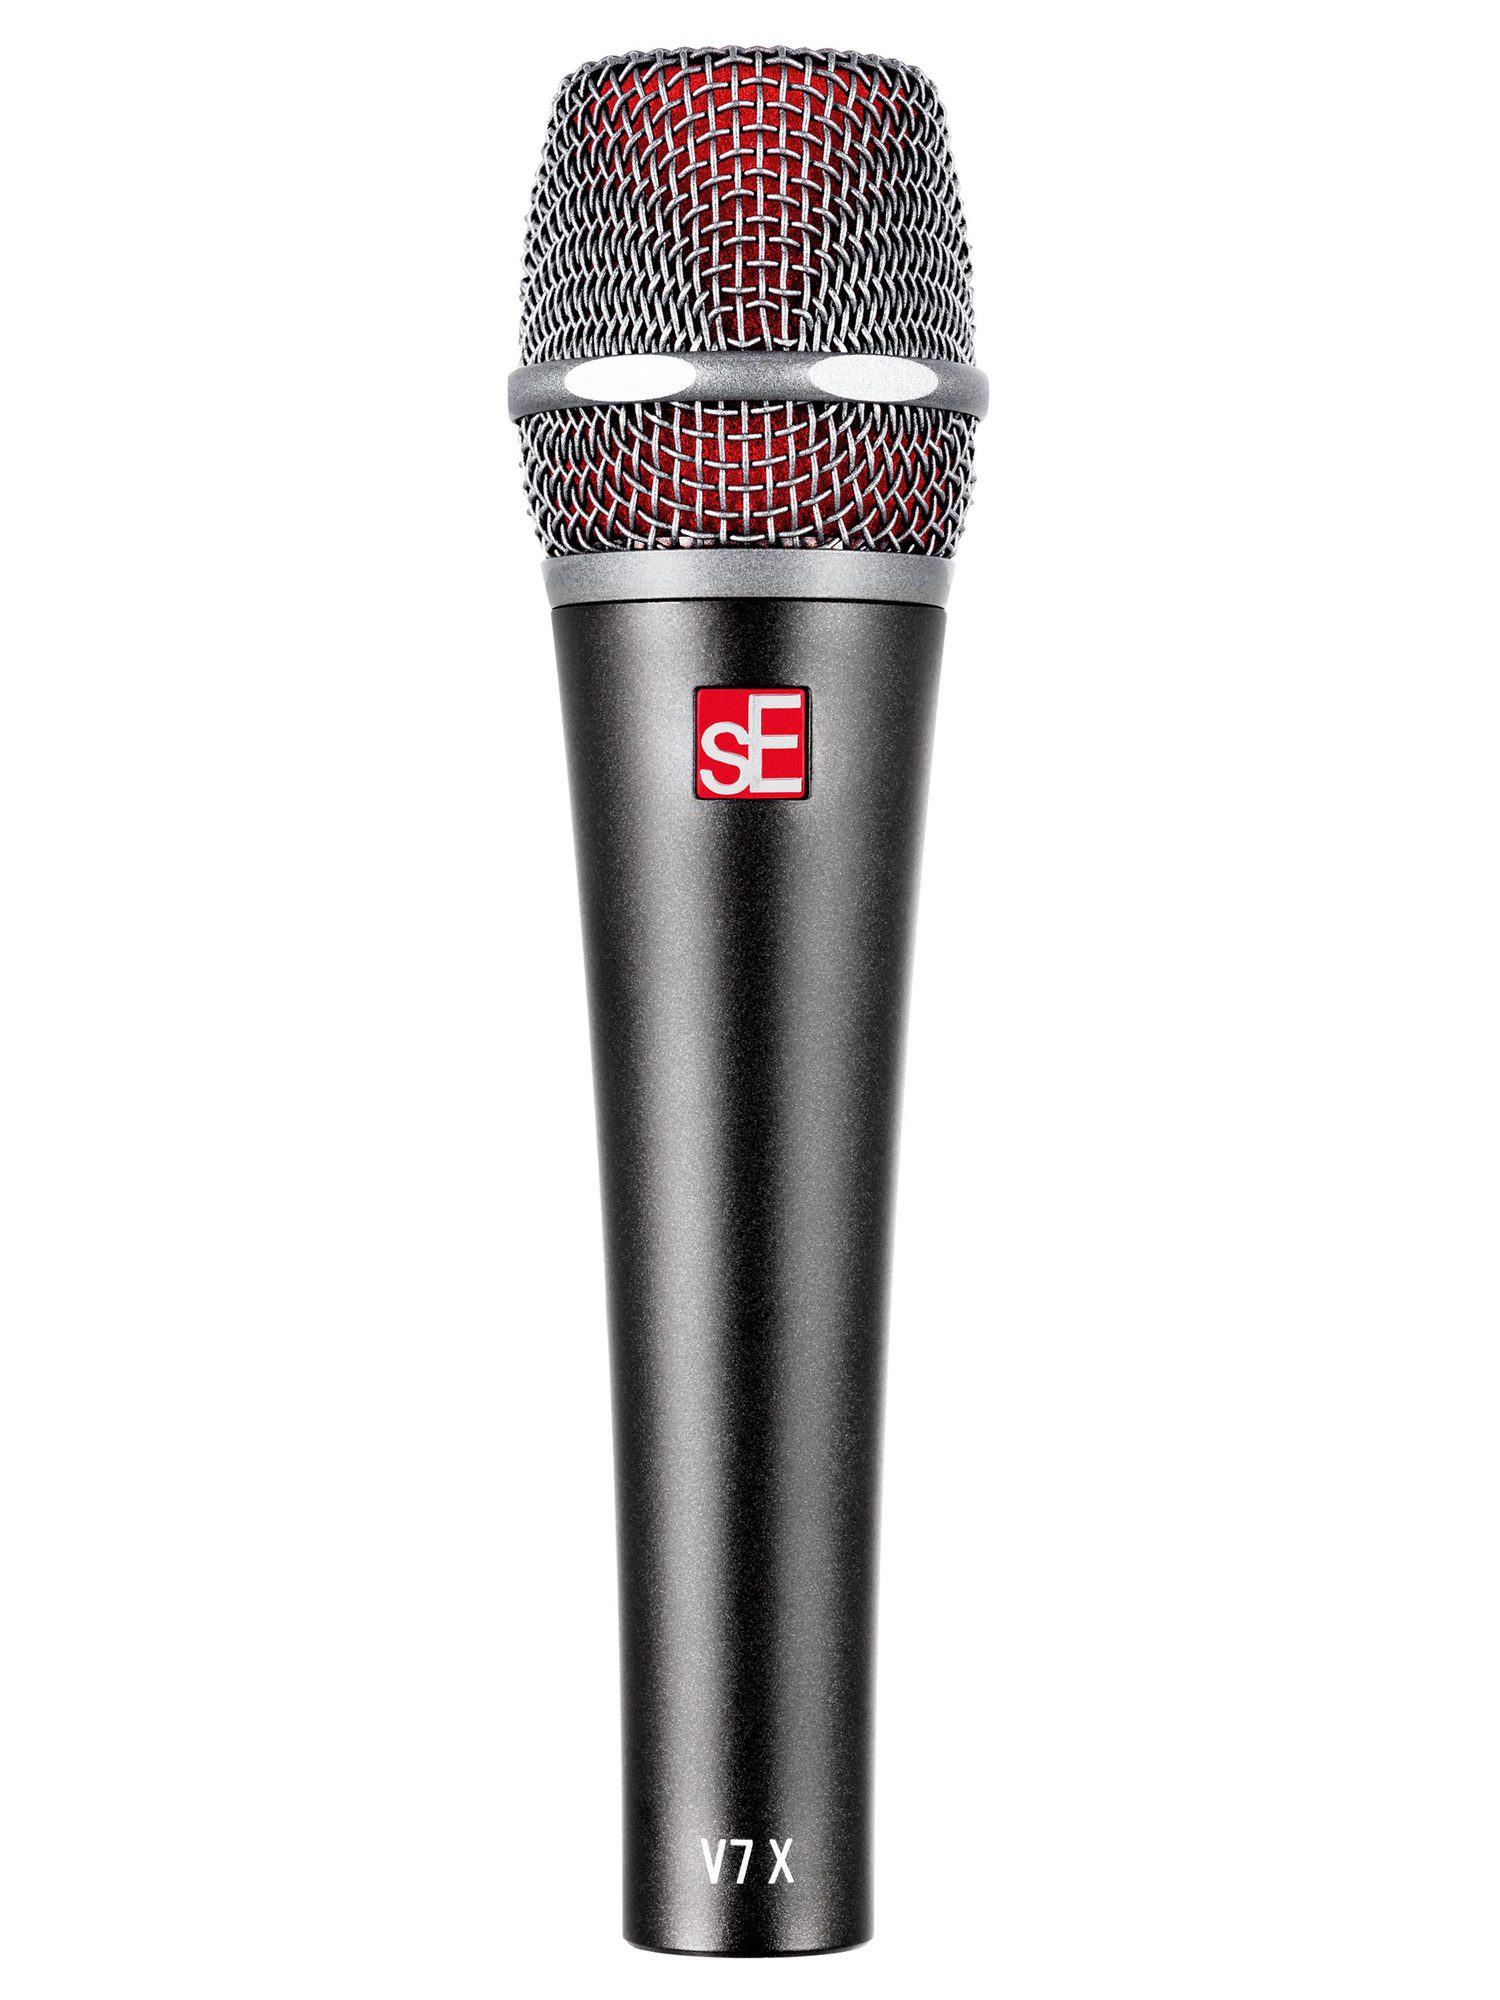 SE V7-X Dynamic Supercardioid Instrument Microphone